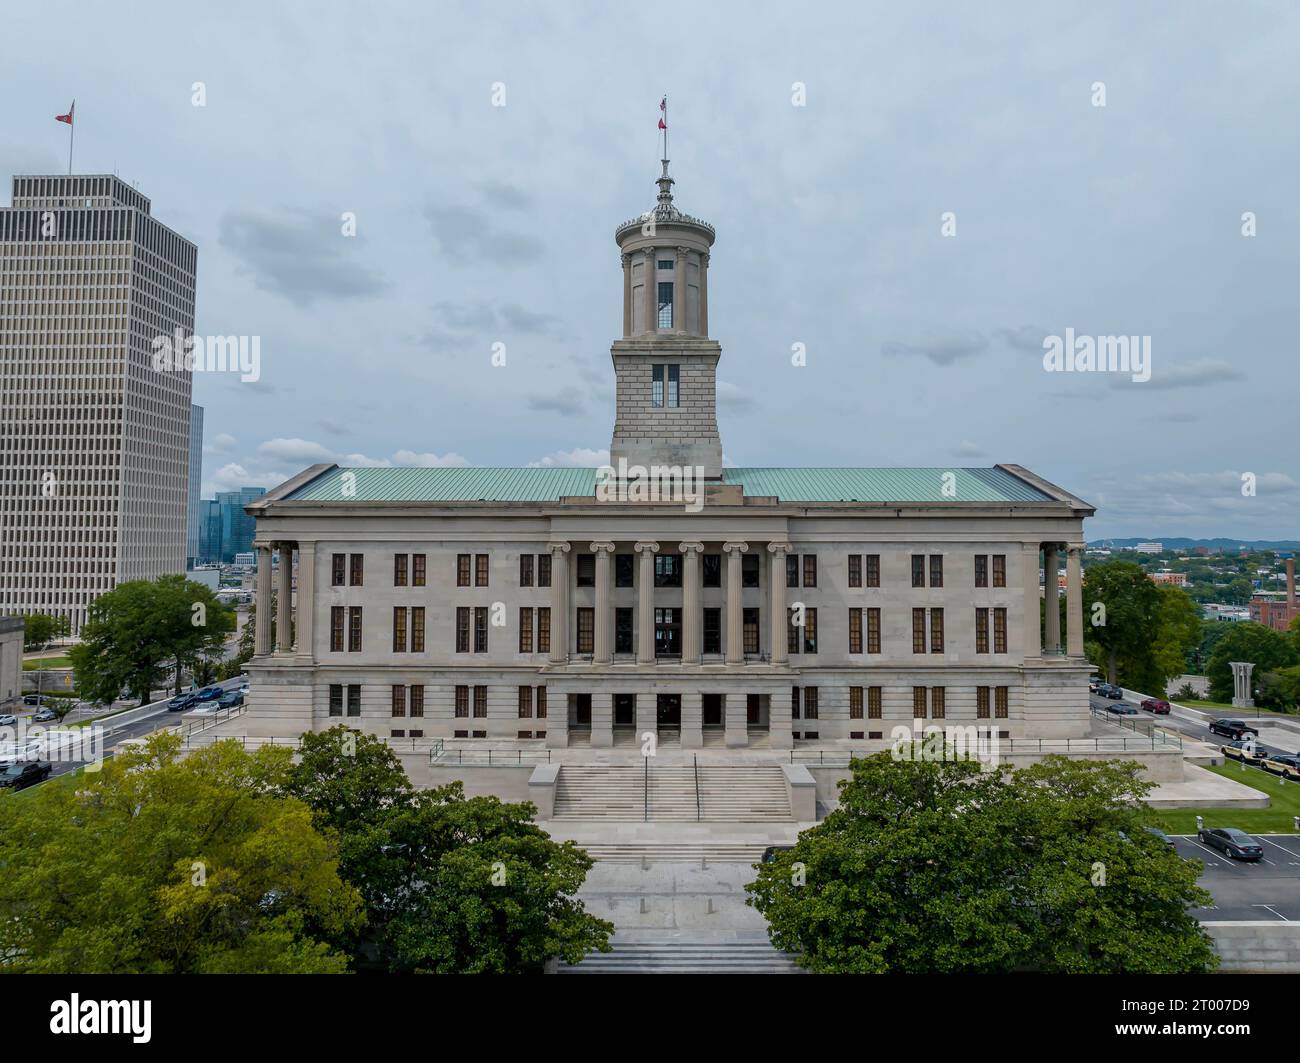 Aerial View Of The State Capitol Building In Nashville Tennessee Stock Photo